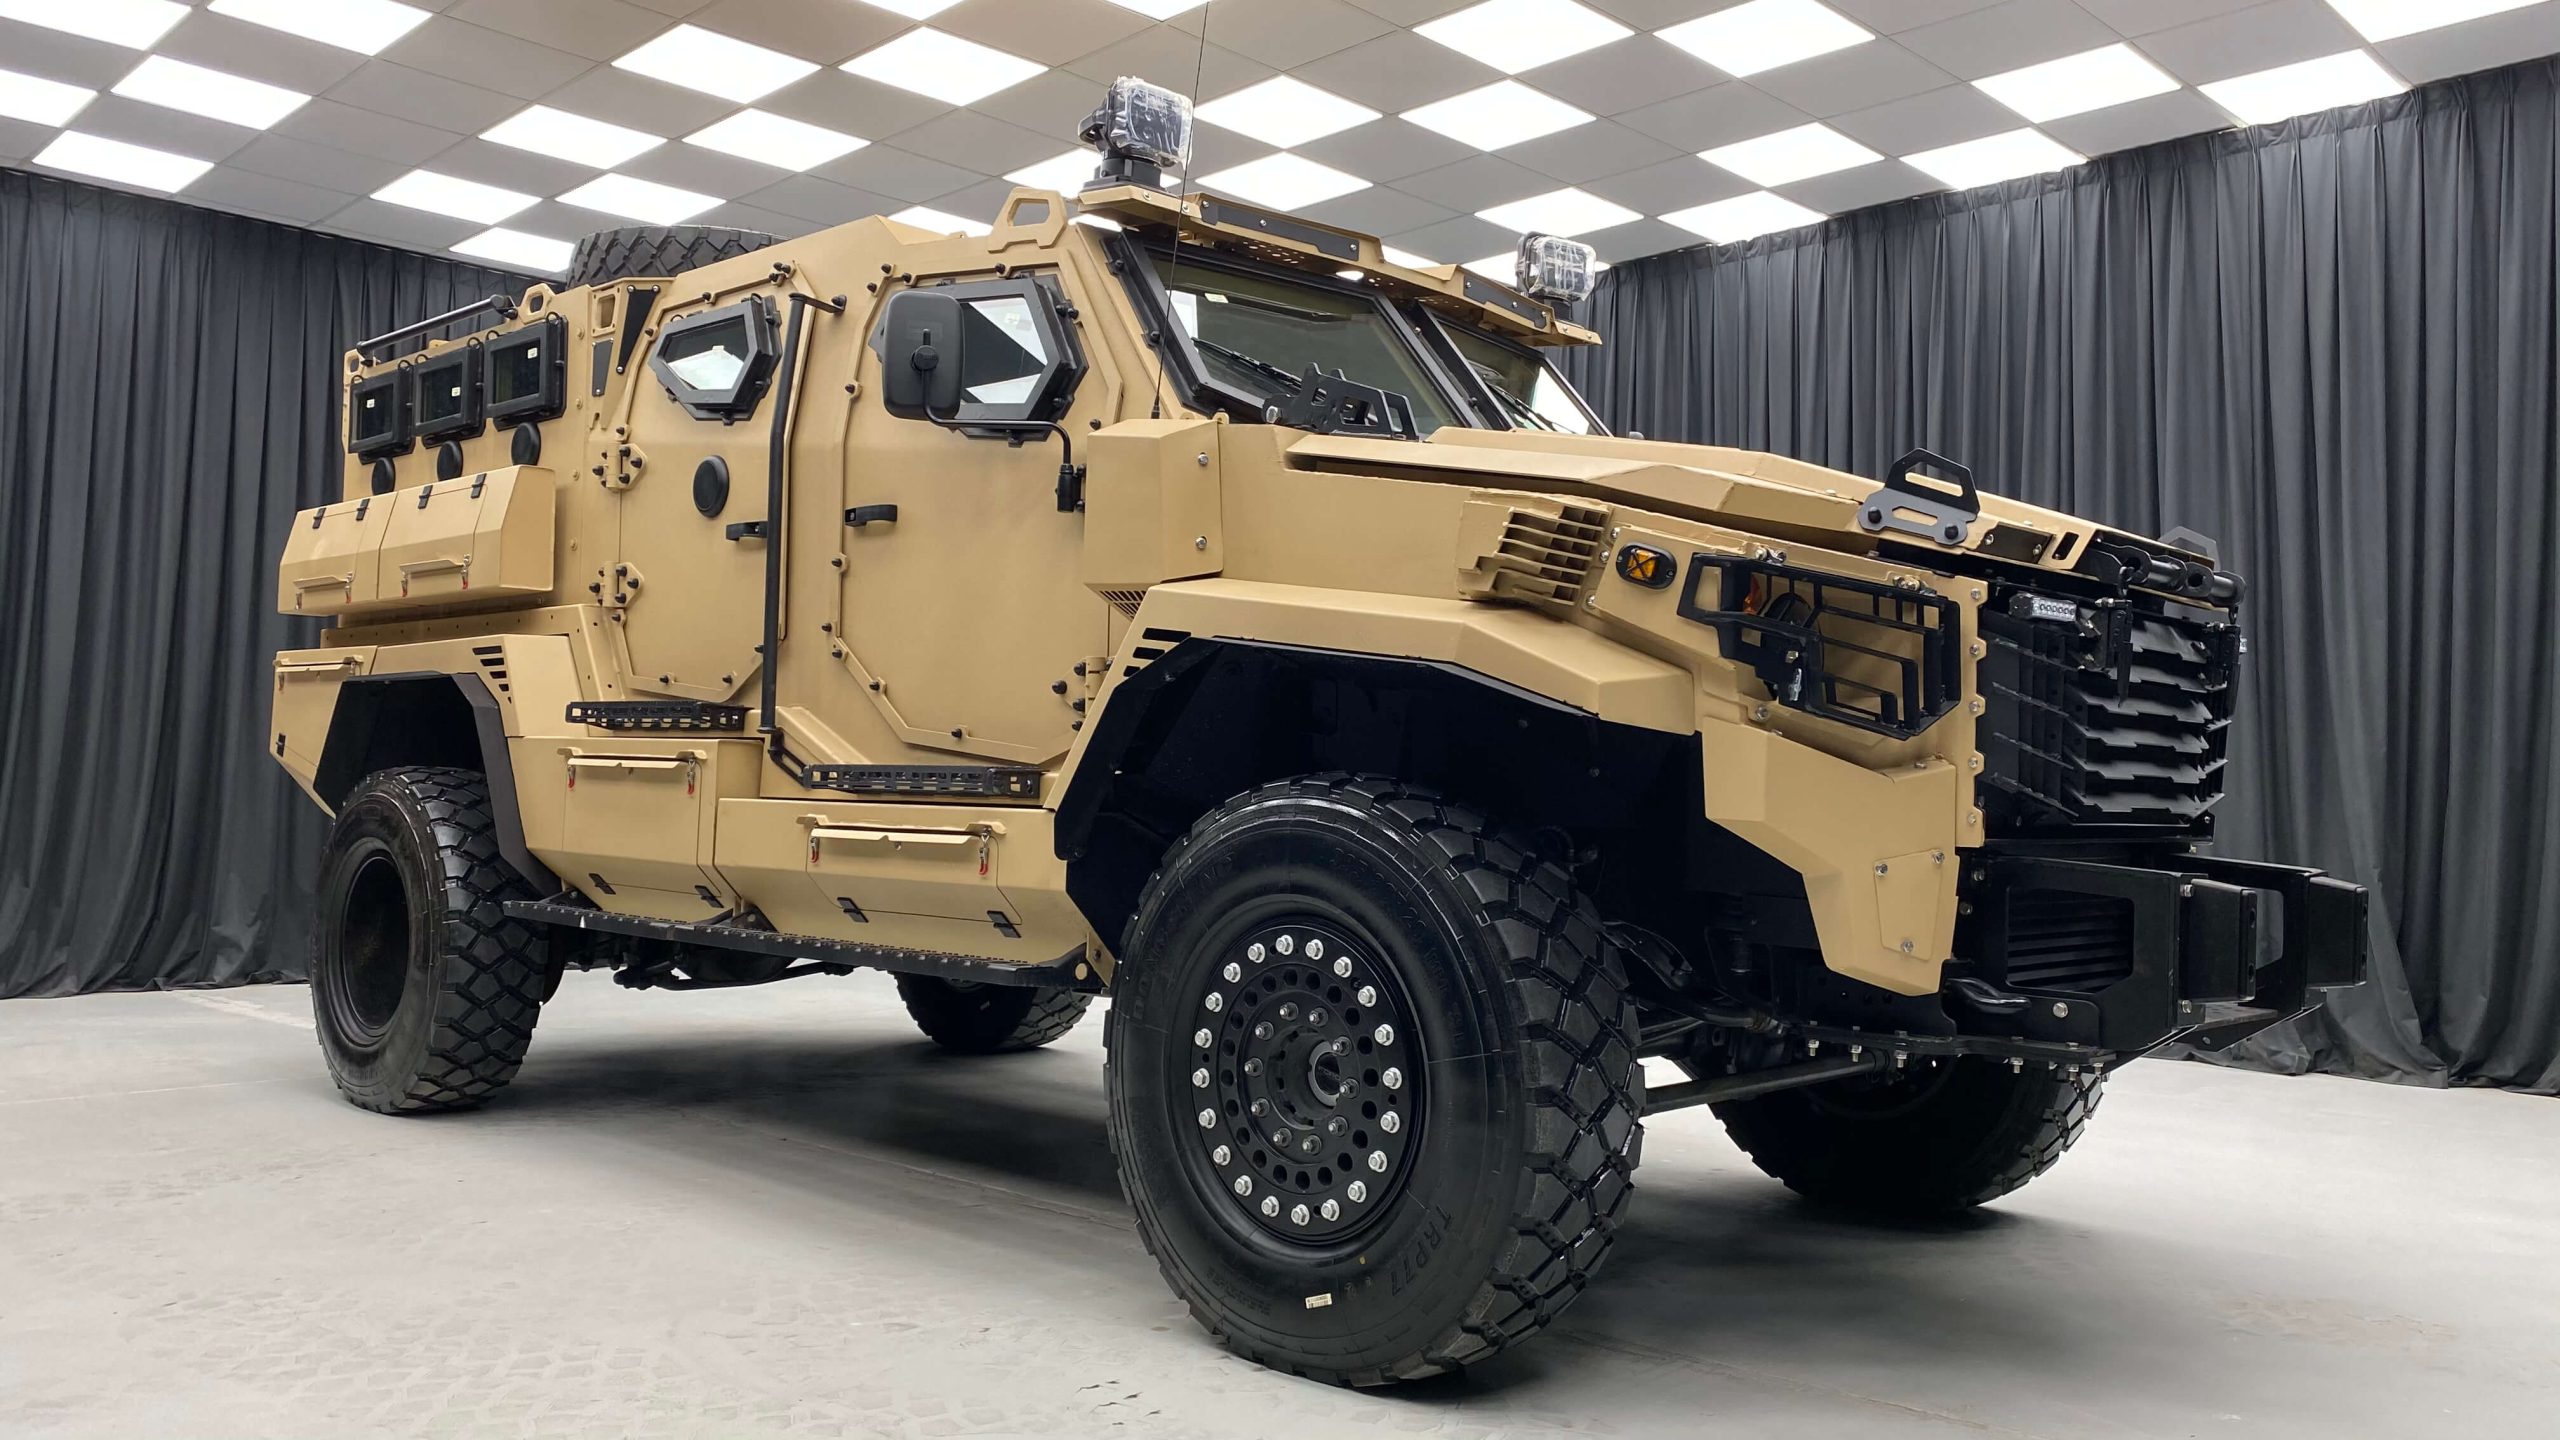 The AFU uses American BATT UMG armored vehicles at the front, they are built on a Ford chassis